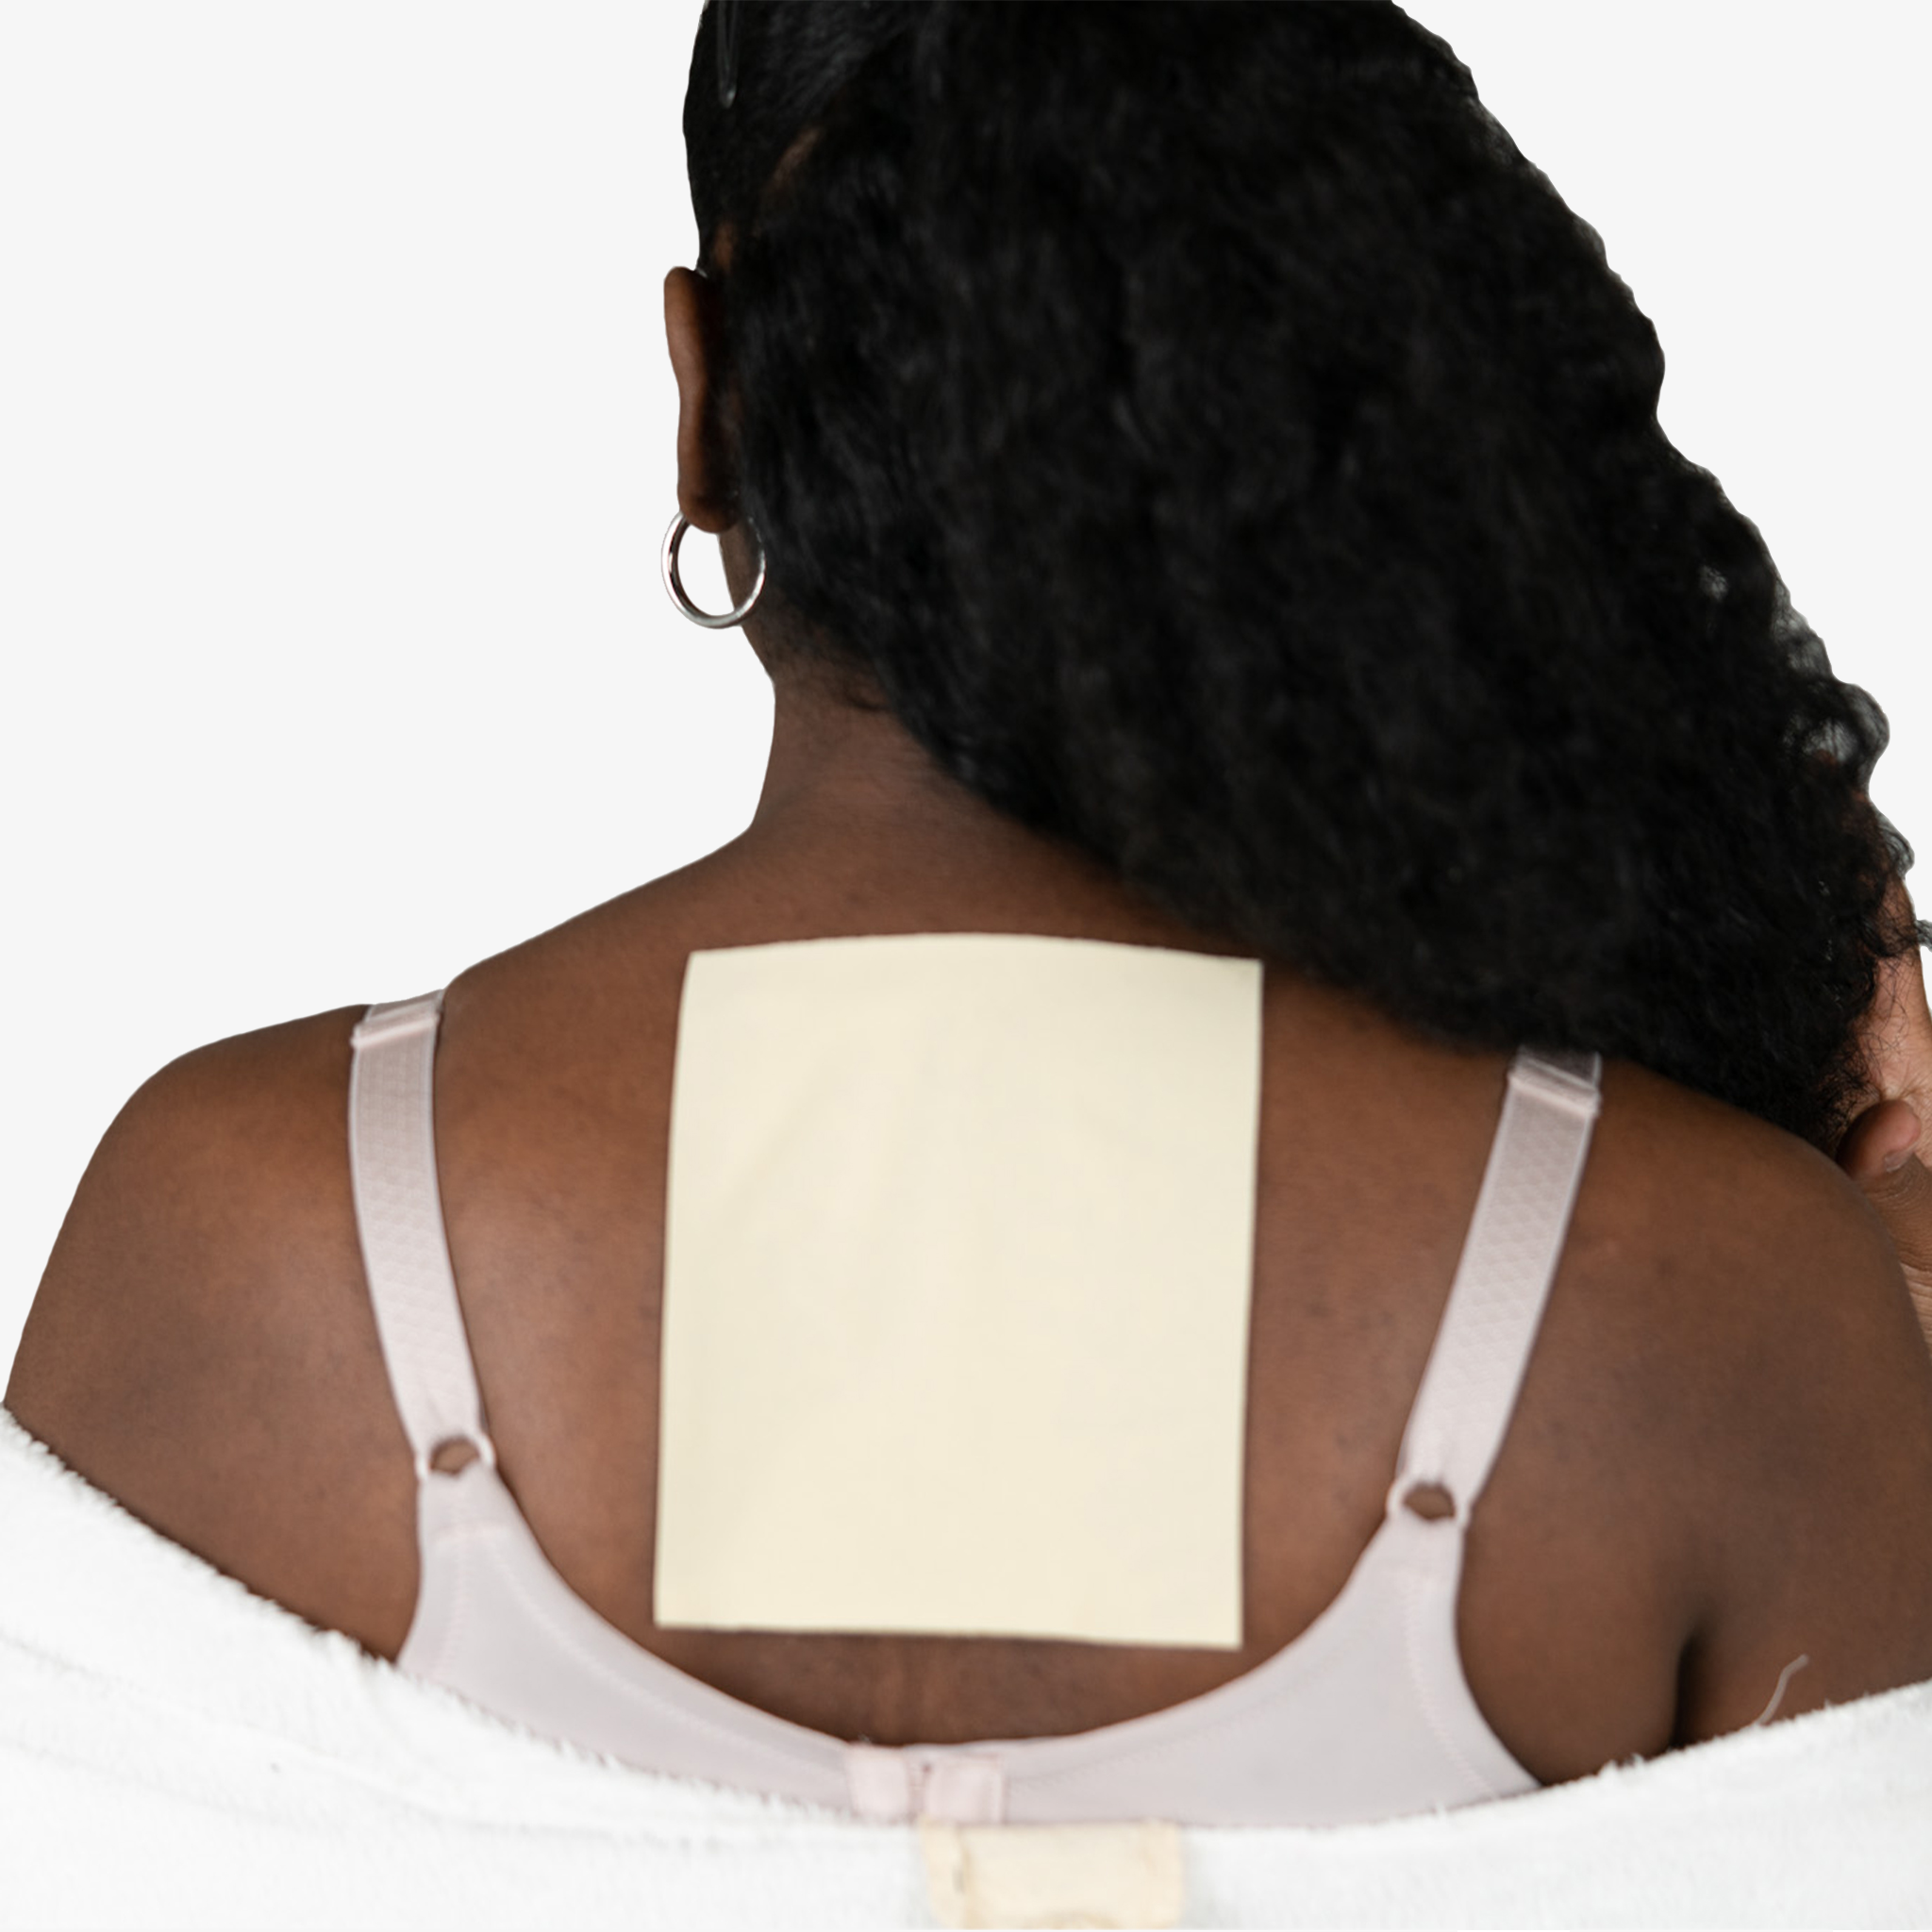 Advanced Medical-Grade Silicone Sheet 5" x 6" on black woman's back | beige